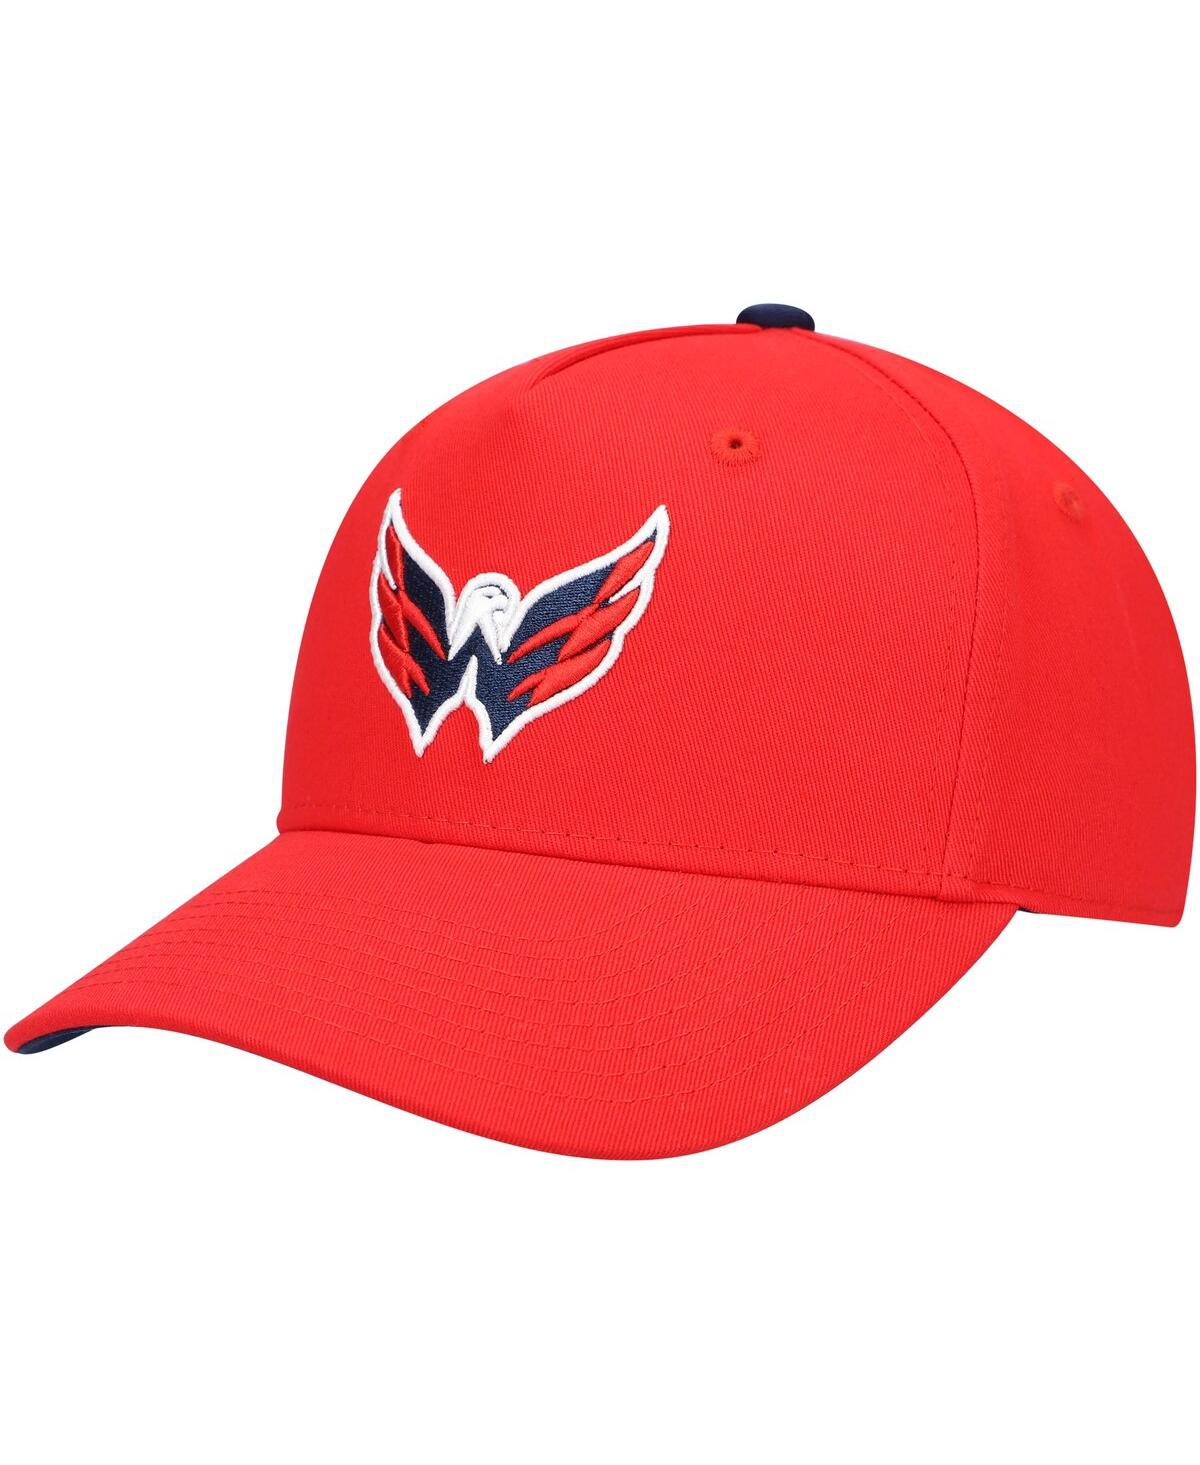 Outerstuff Kids' Big Boys And Girls Red Washington Capitals Snapback Hat